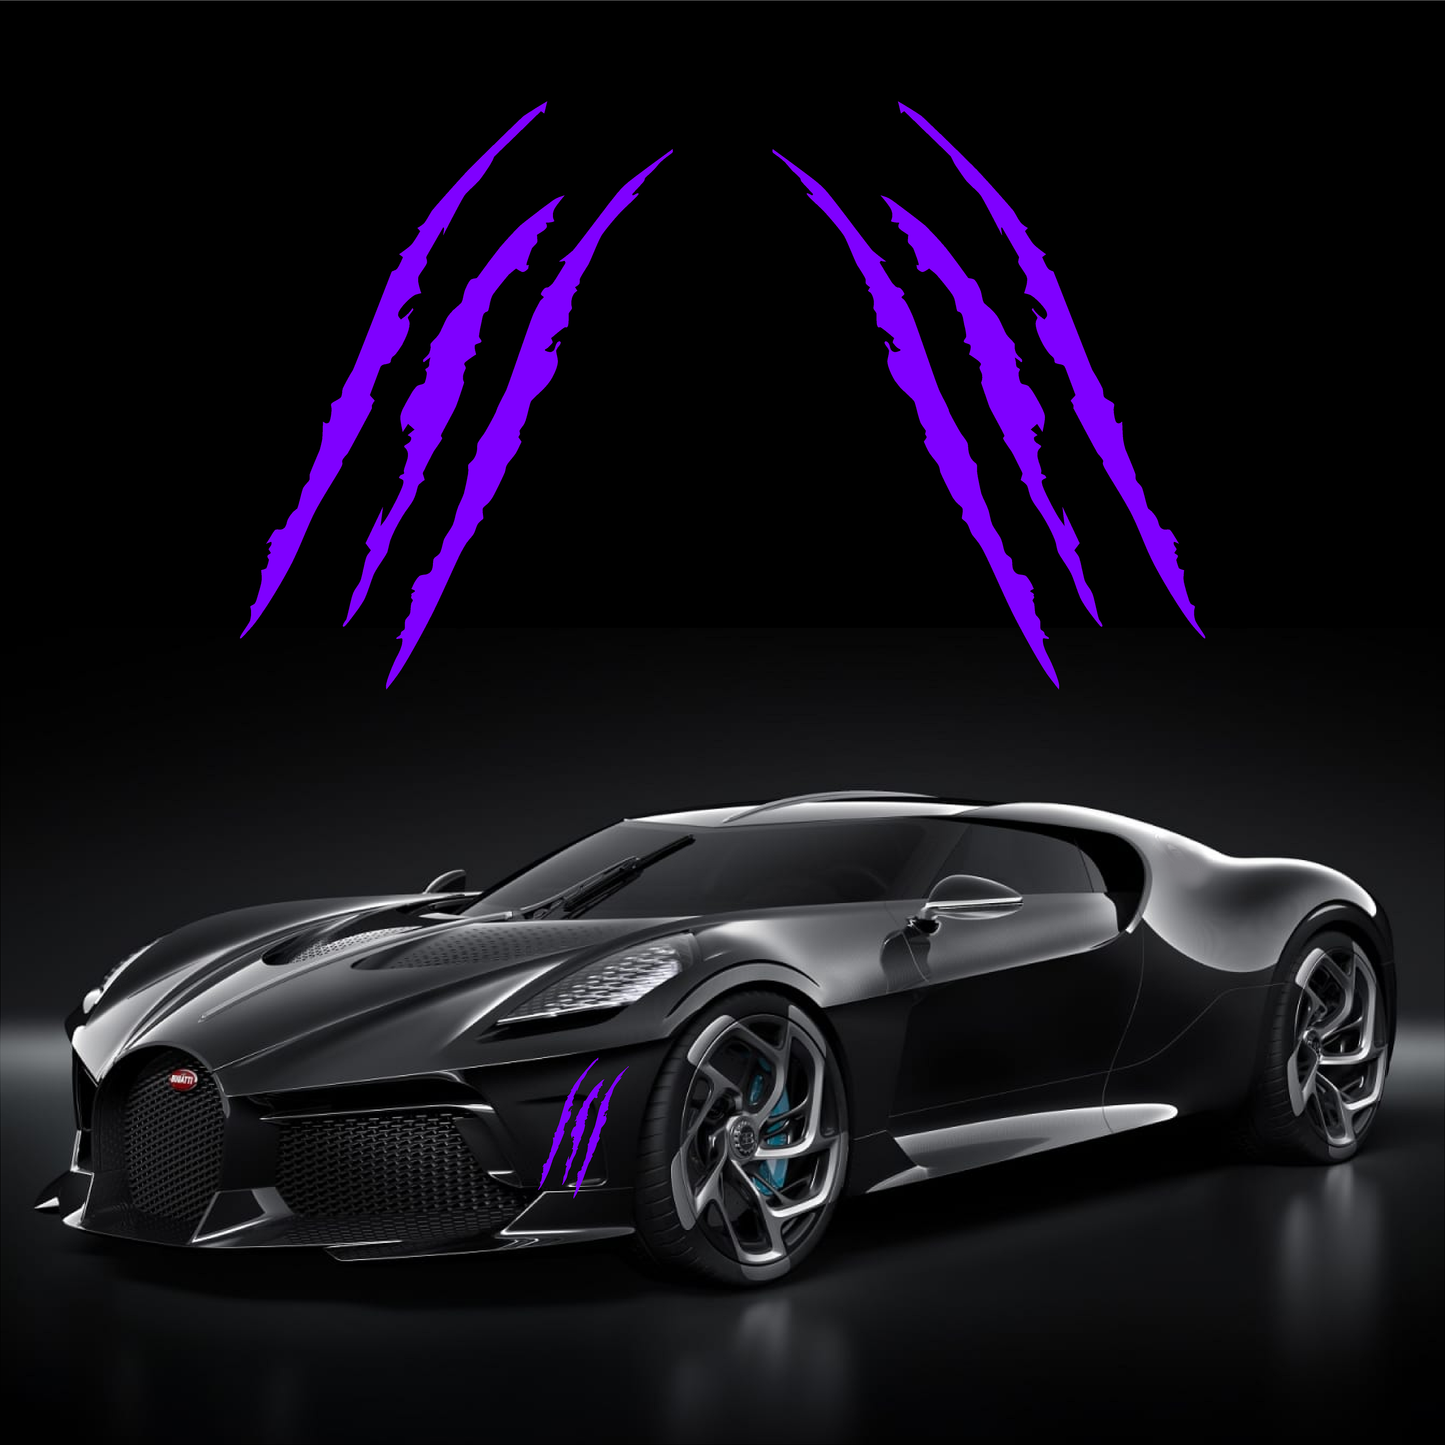 2 pcs Monster Claw Marks (M79) Headlight Decal Available in Eleven Colors! Sticker Stripes Scratch Decal Vinyl for Sports Cars SUV Pickup Truck Window Motorcycles by CustomDecal US (Purple)